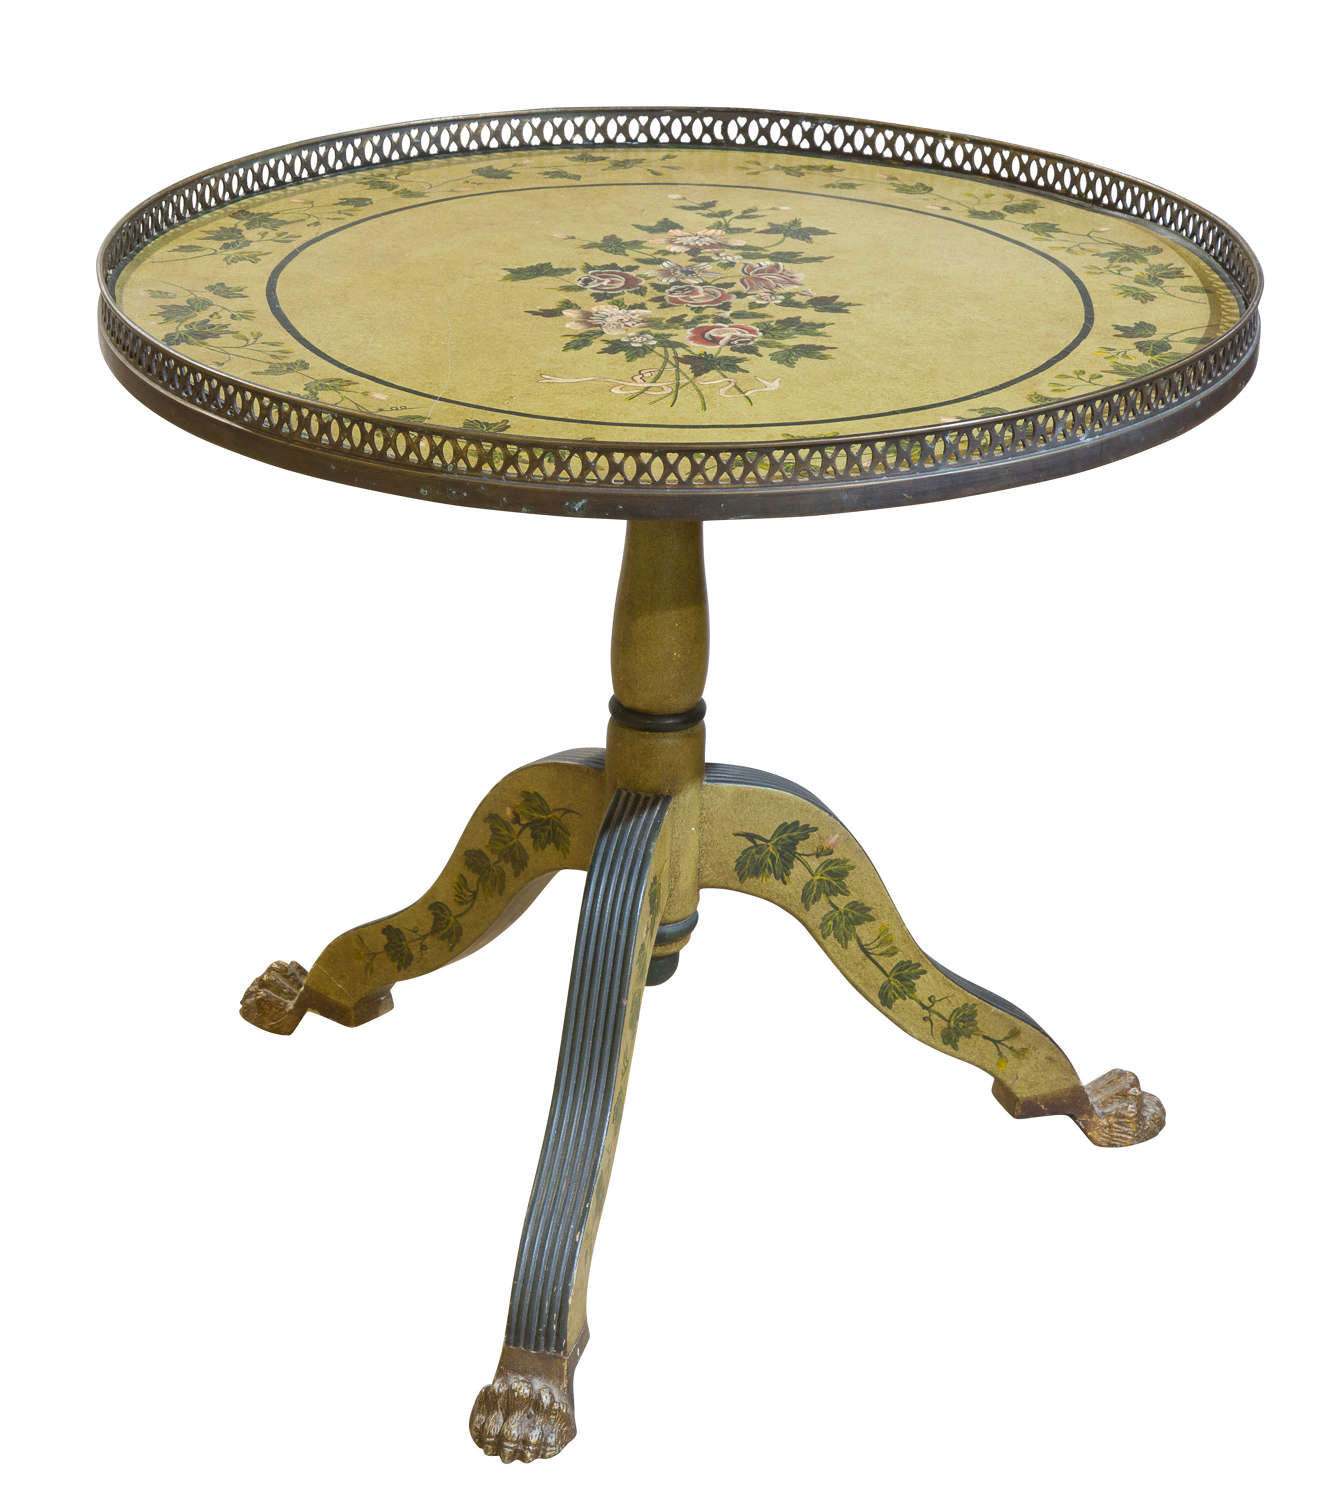 Circular painted topped table